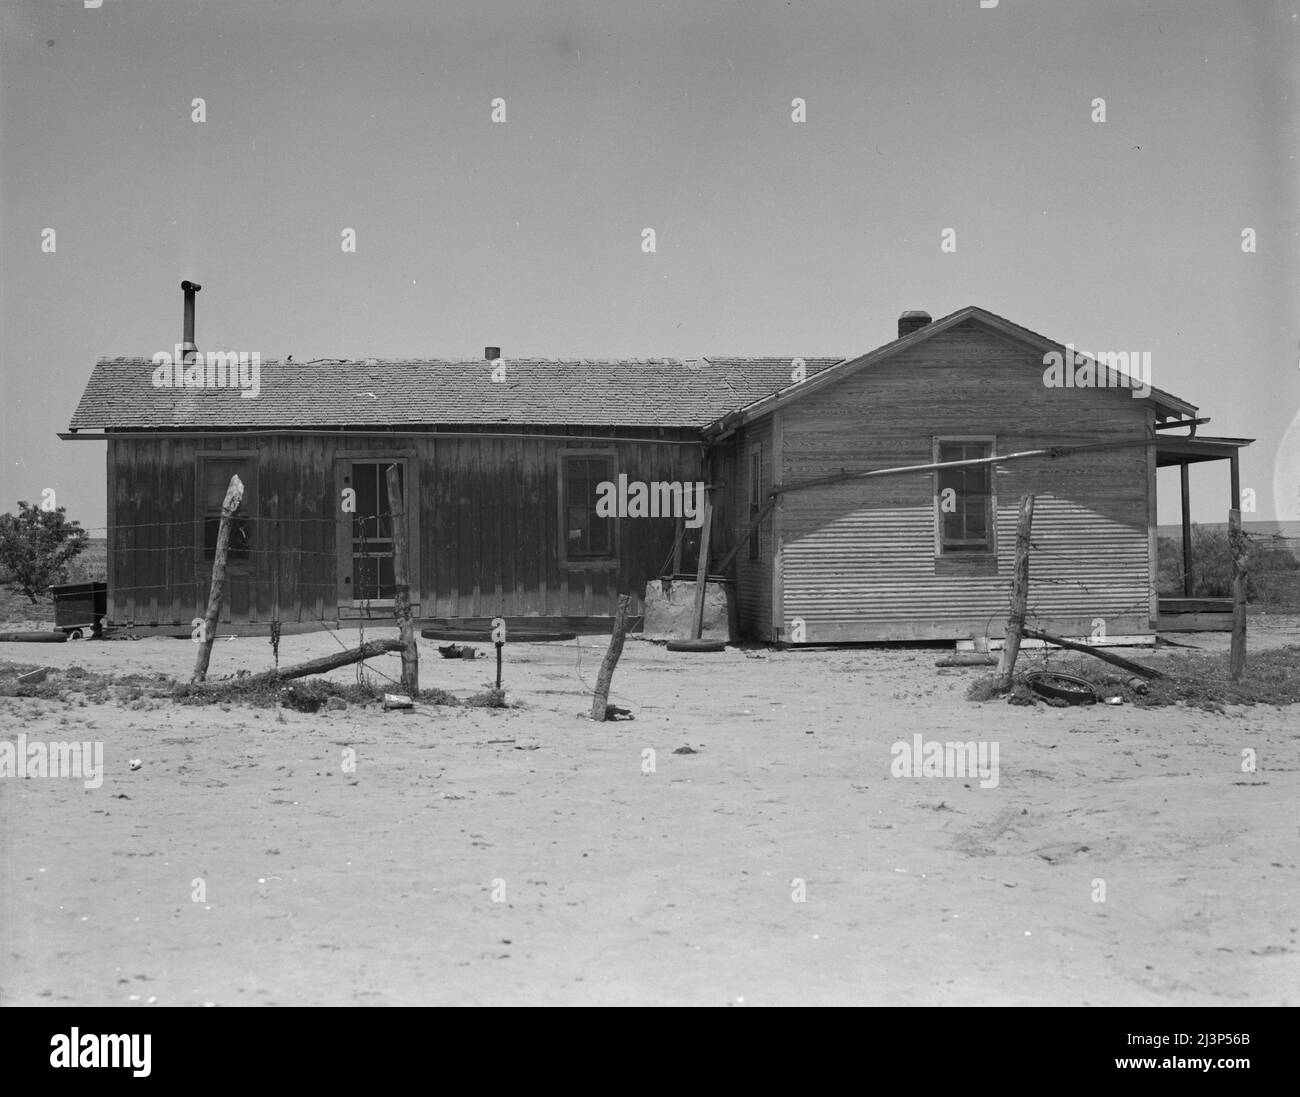 Sharecropper shack Black and White Stock Photos and Images